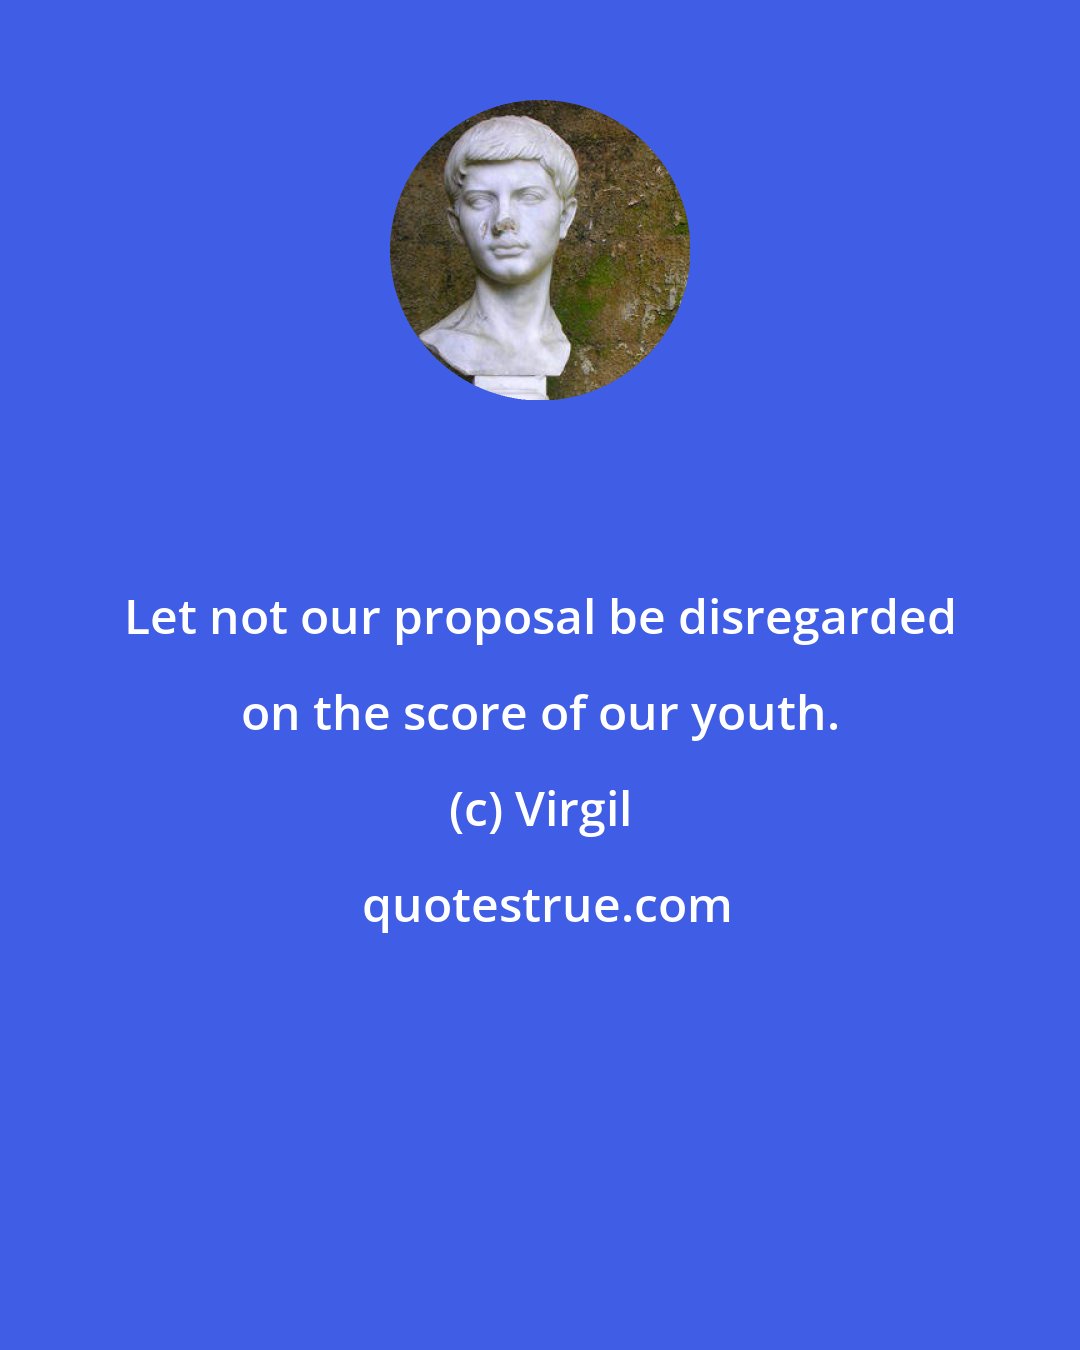 Virgil: Let not our proposal be disregarded on the score of our youth.